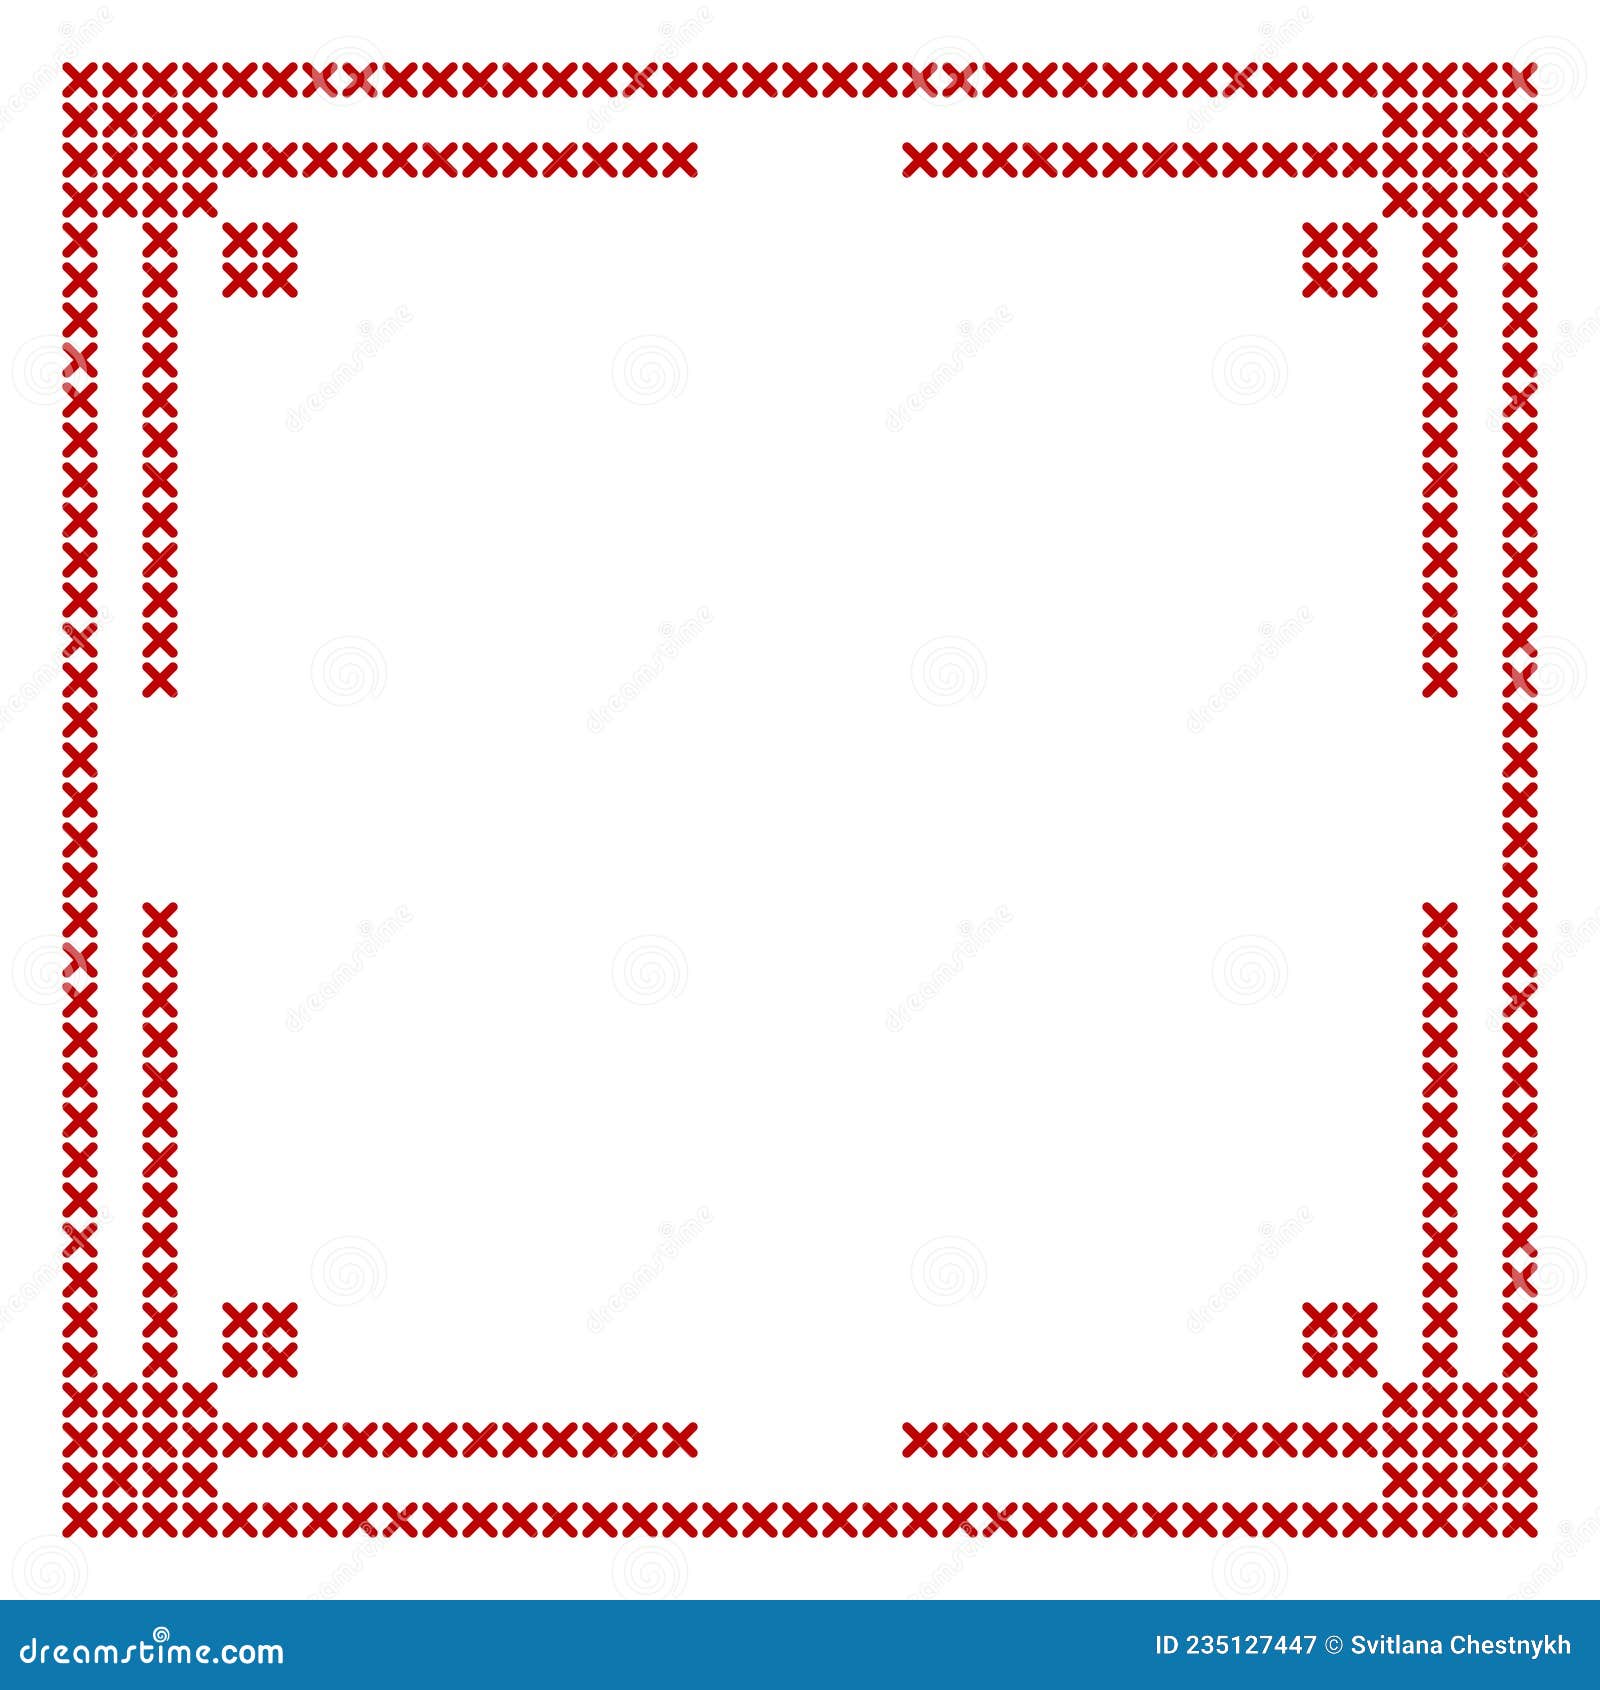 Cross Stitch Border Frame Pattern, Perfect for Christmas Banner Design  Stock Vector - Illustration of layout, classic: 235127447